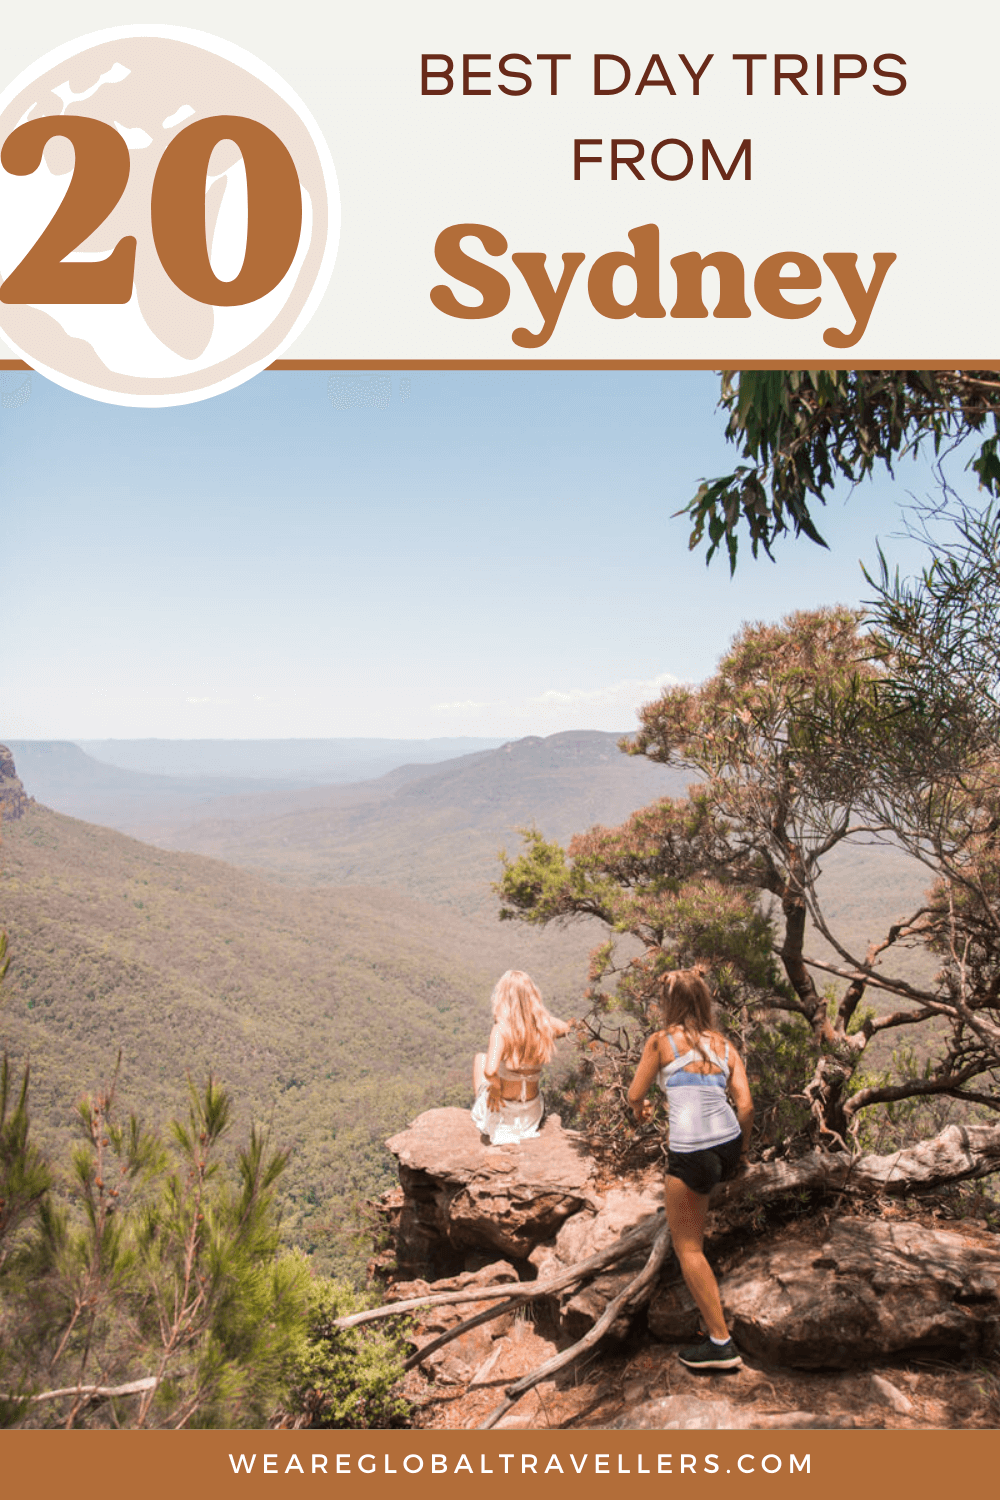 20 of the best day trips from Sydney